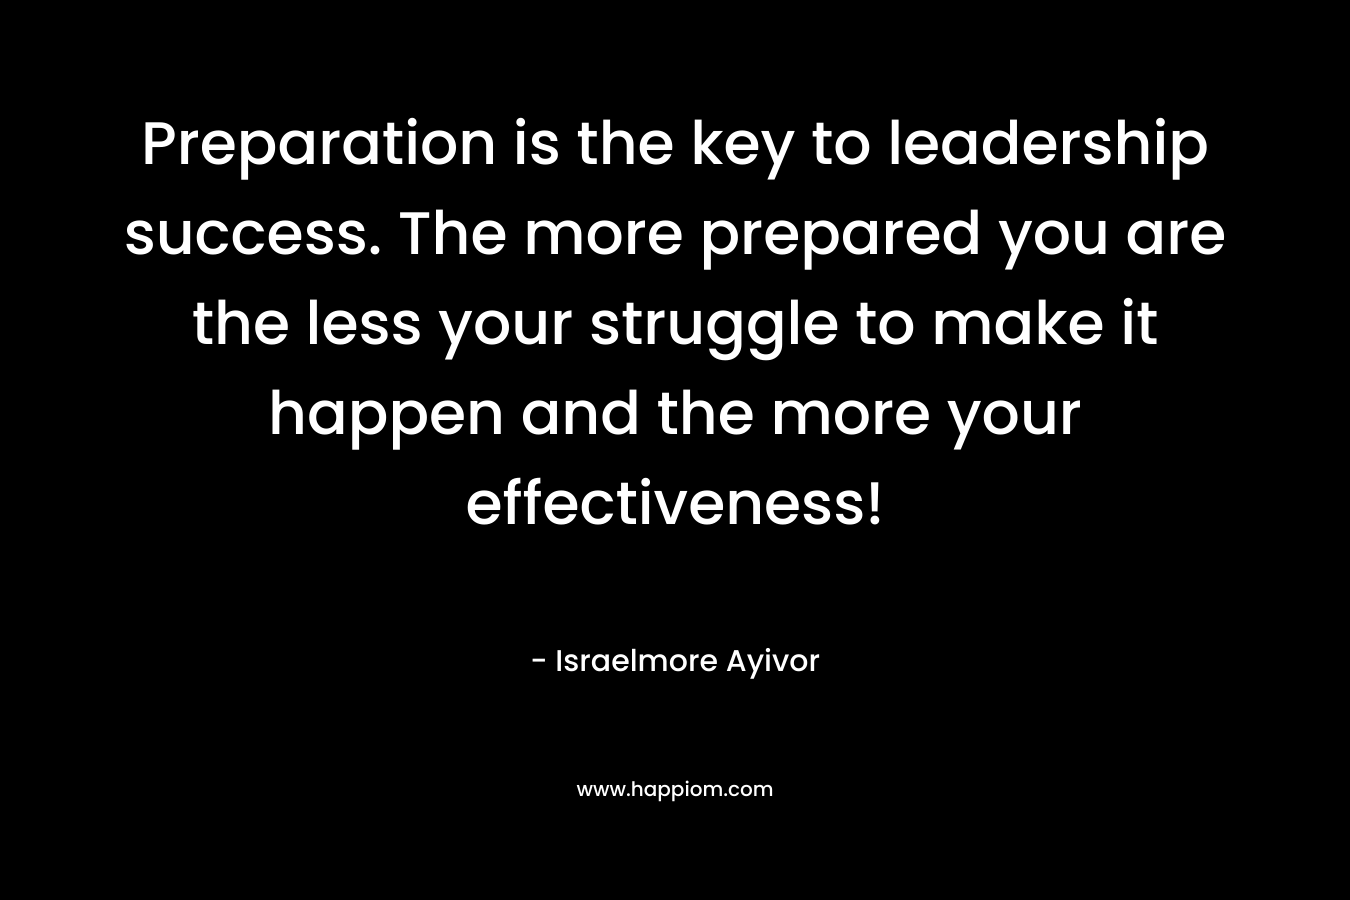 Preparation is the key to leadership success. The more prepared you are the less your struggle to make it happen and the more your effectiveness! – Israelmore Ayivor